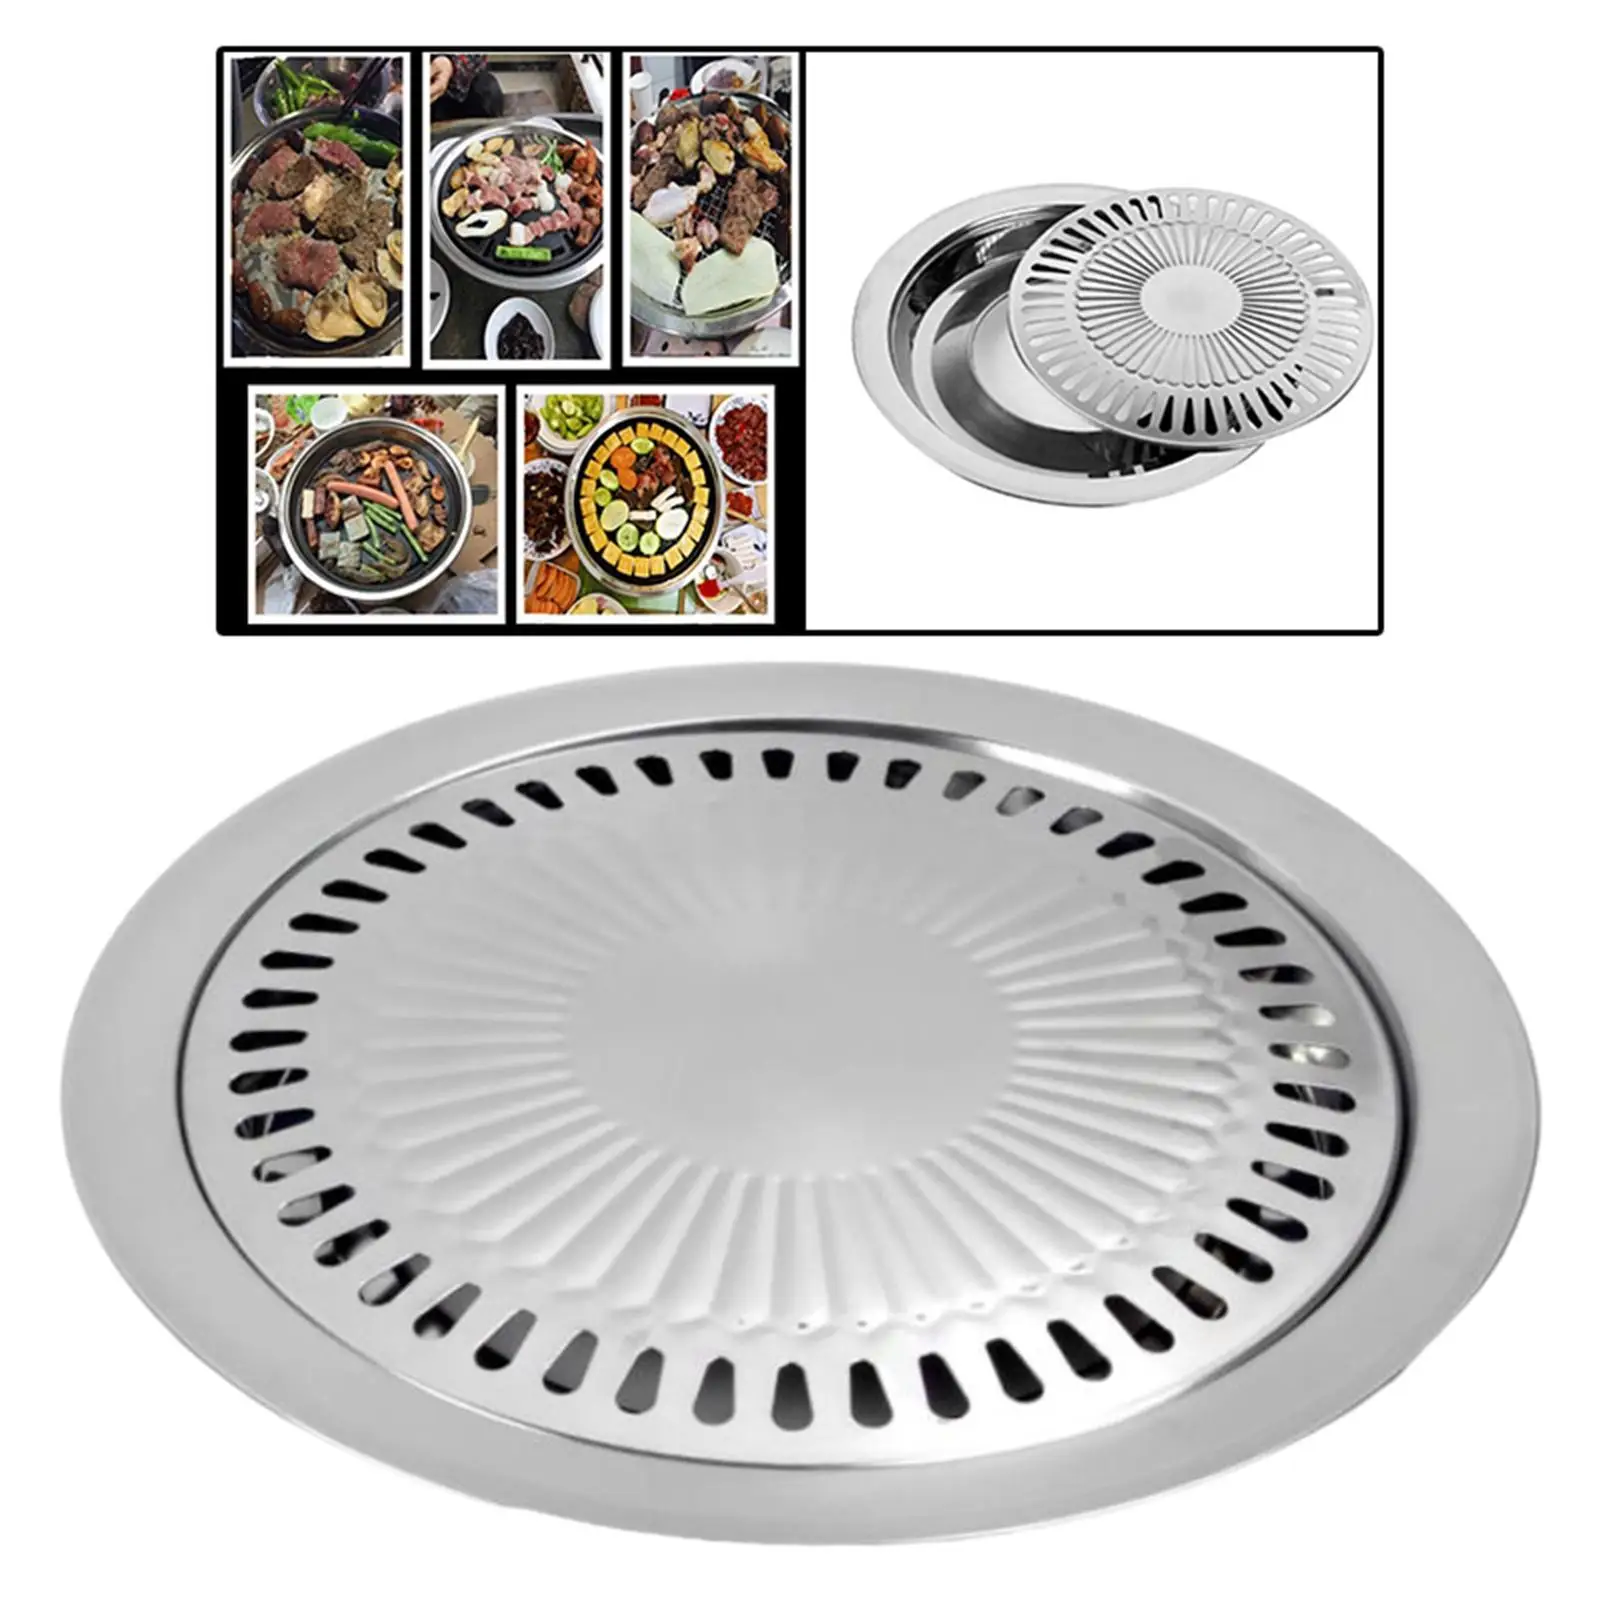 Non Stick Barbecue Plate Grilling Plate Roasting Plate Smokeless Portable BBQ Grill Plate for Outdoor Camping Picnic Grill BBQ